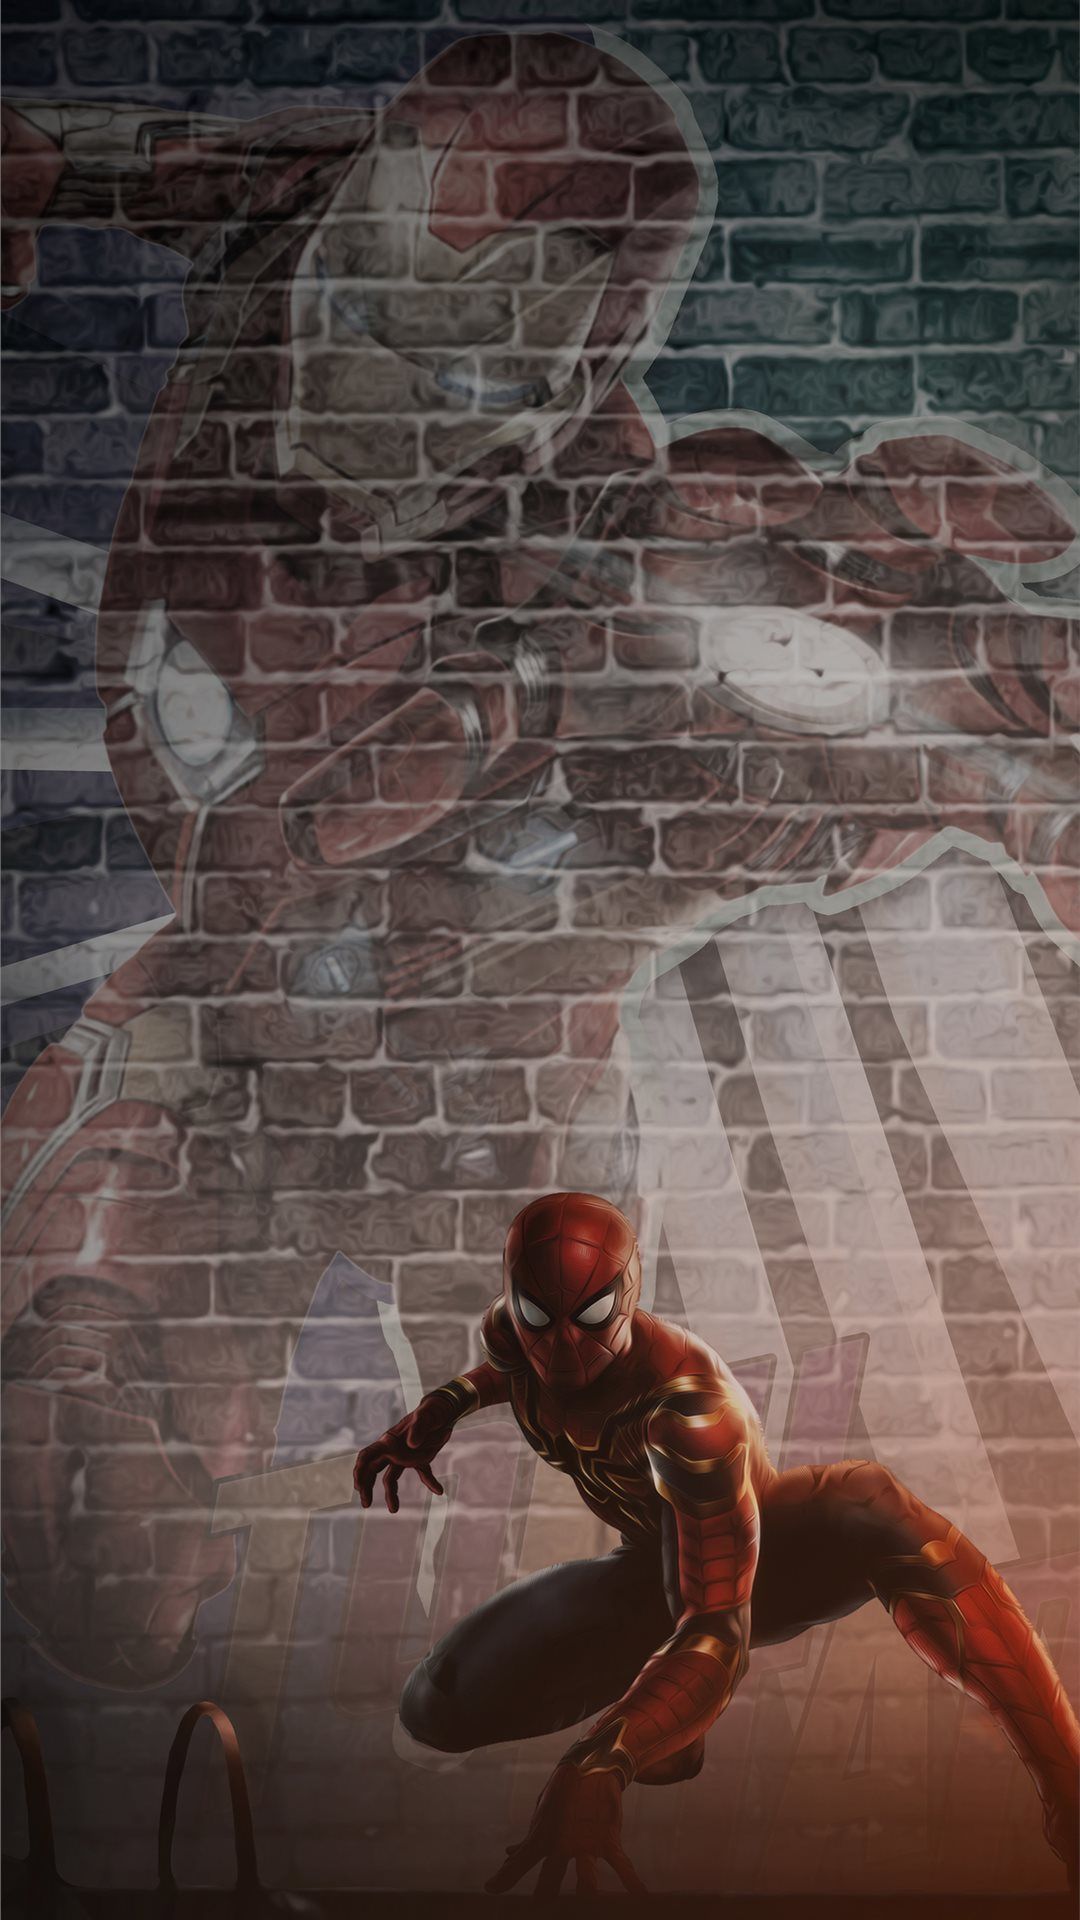 Spider-Man Aesthetic Wallpapers - Wallpaper Cave